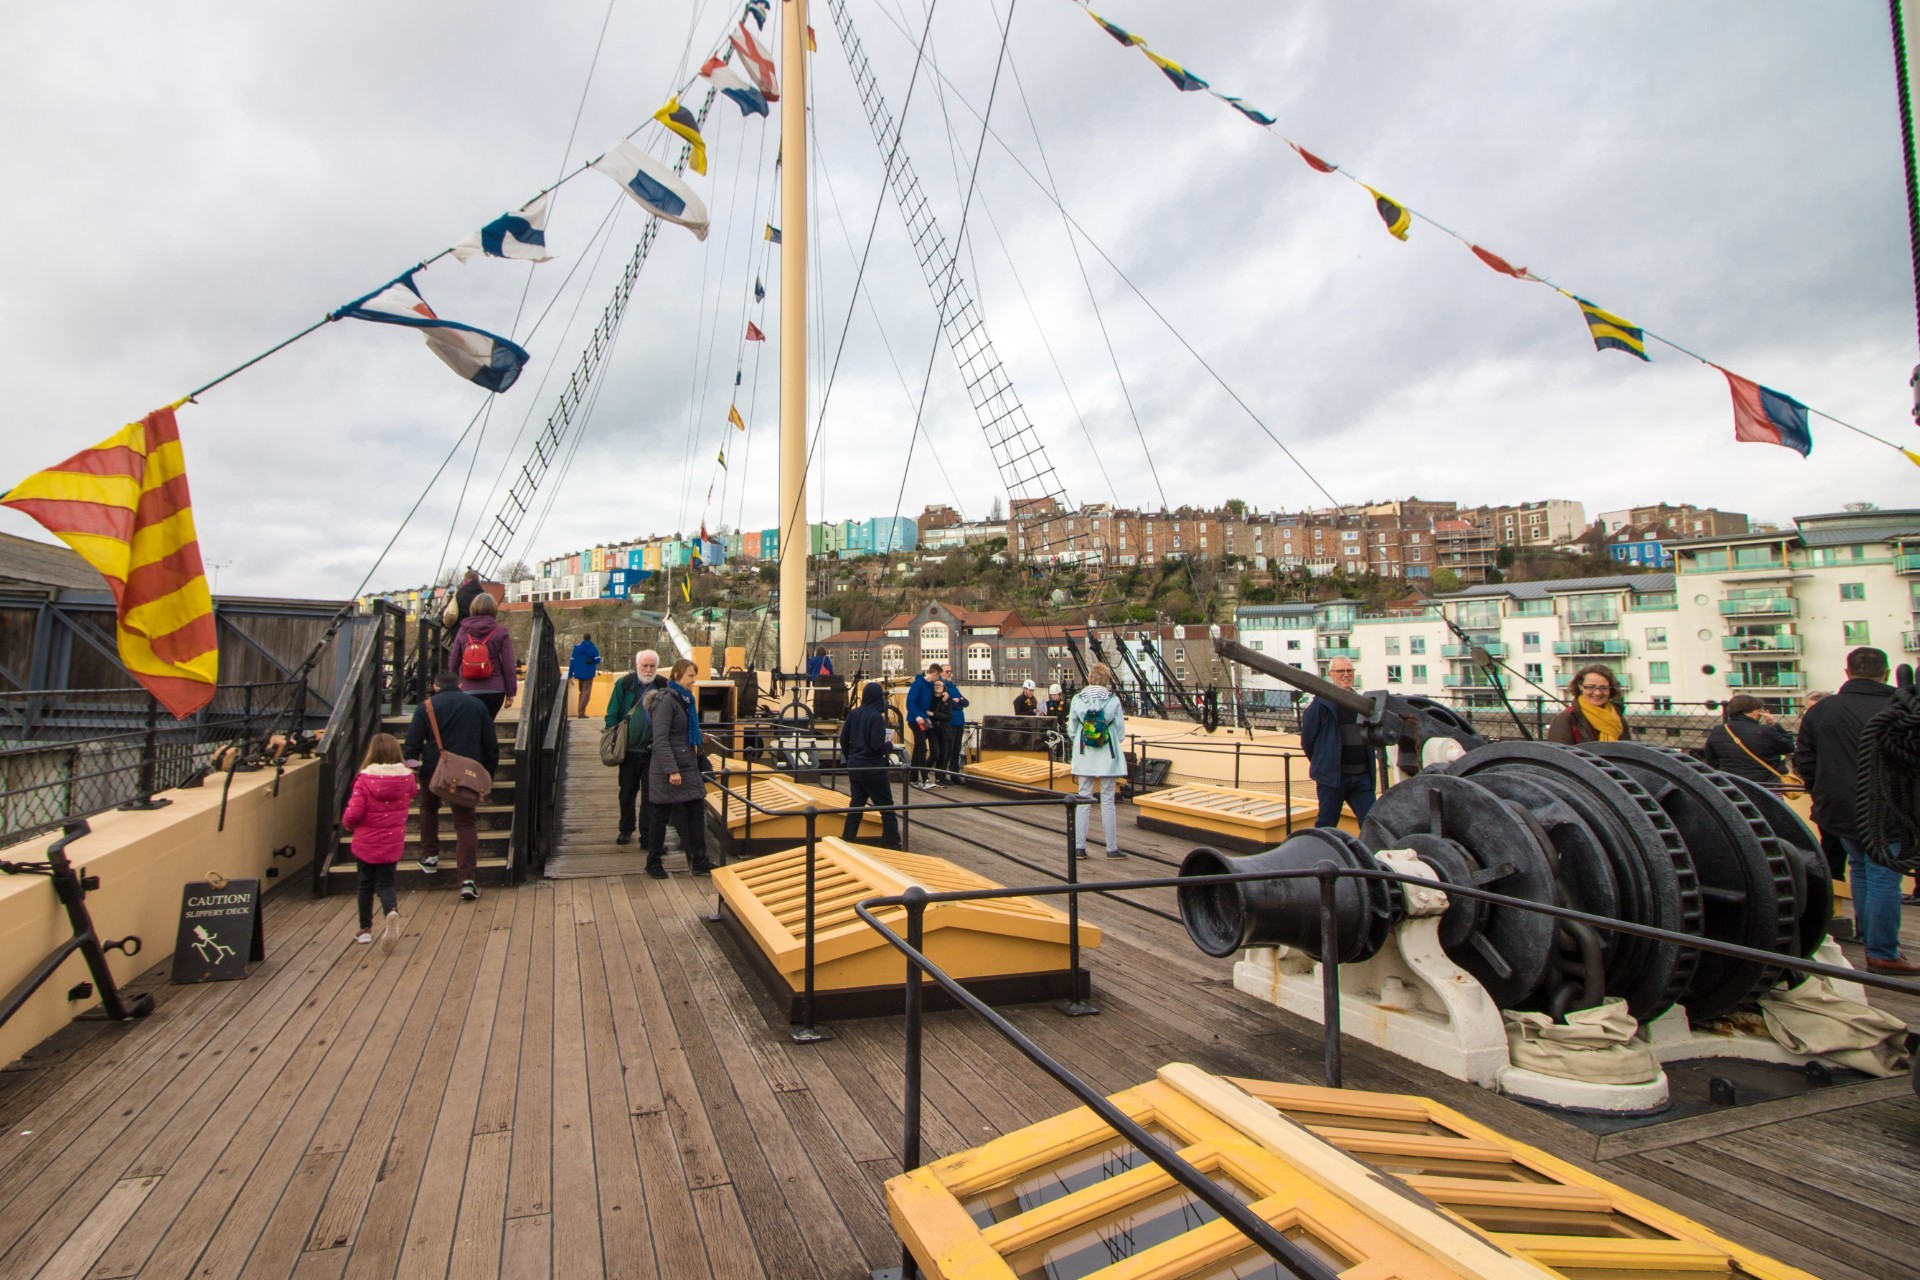 Brunel's SS Great Britain. Ship. Pirate ship. Boat. Masts. Colourful flags. Canon. How to Spend the Perfect Day on Bristol Harbourside. What to do on Bristol Harbourside. Bristol UK. Bristol England. Things to do on Bristol Harbourside. Bristol travel guide. Bristol travel tips. Bristol travel blog. What to do in Bristol. What to see in Bristol. Things to do in Bristol. Things to see in Bristol. How to spend a day in Bristol.